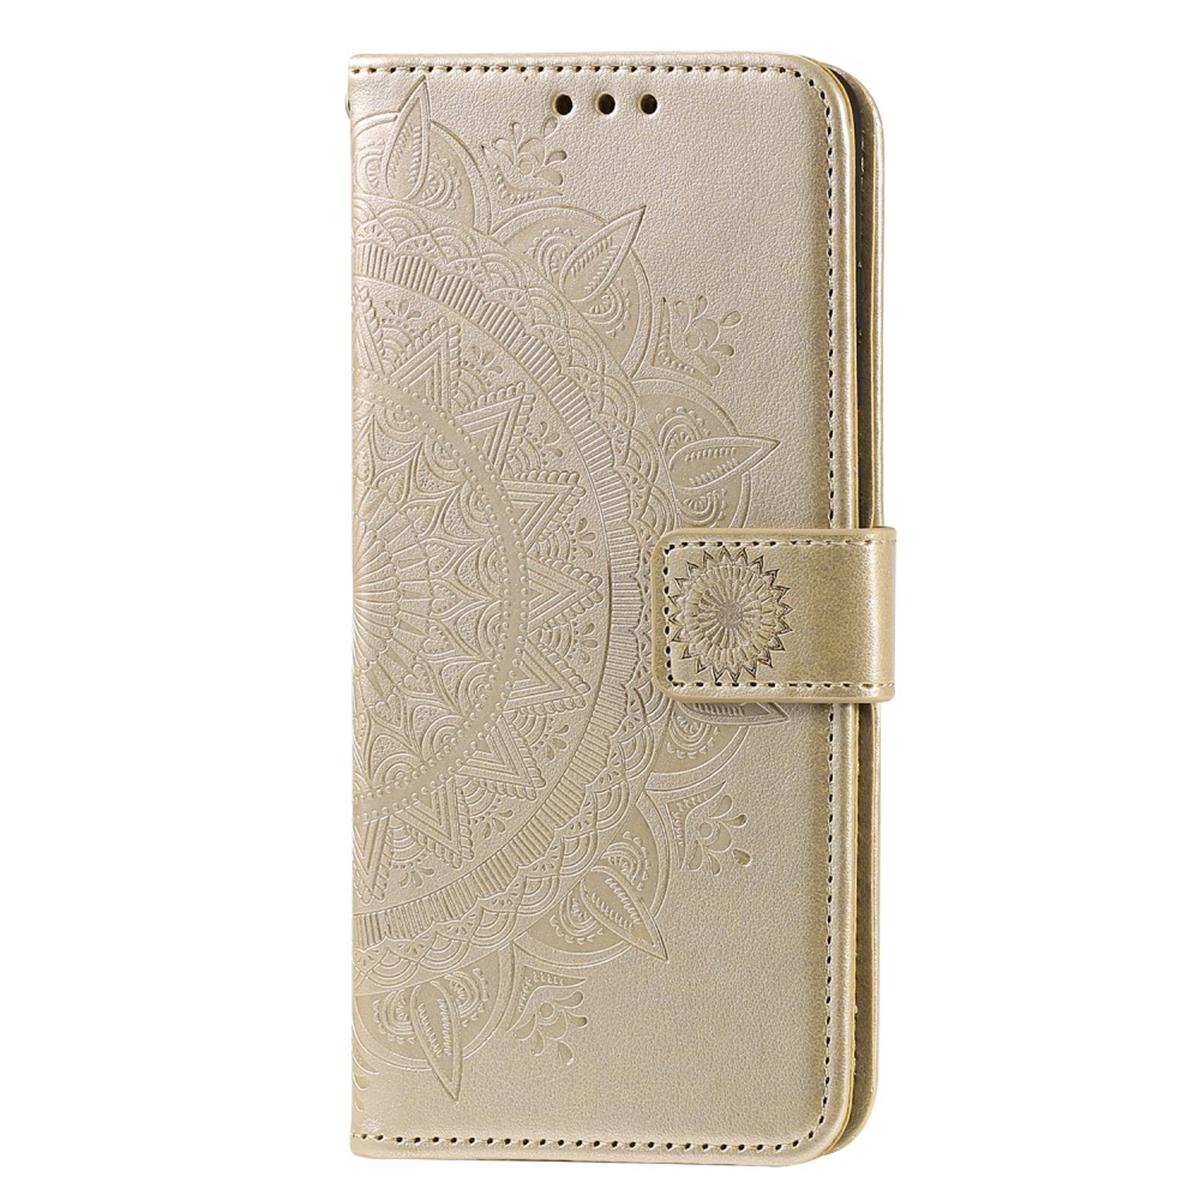 COVERKINGZ Klapphülle mit Bookcover, A31, Galaxy Gold Mandala Samsung, Muster